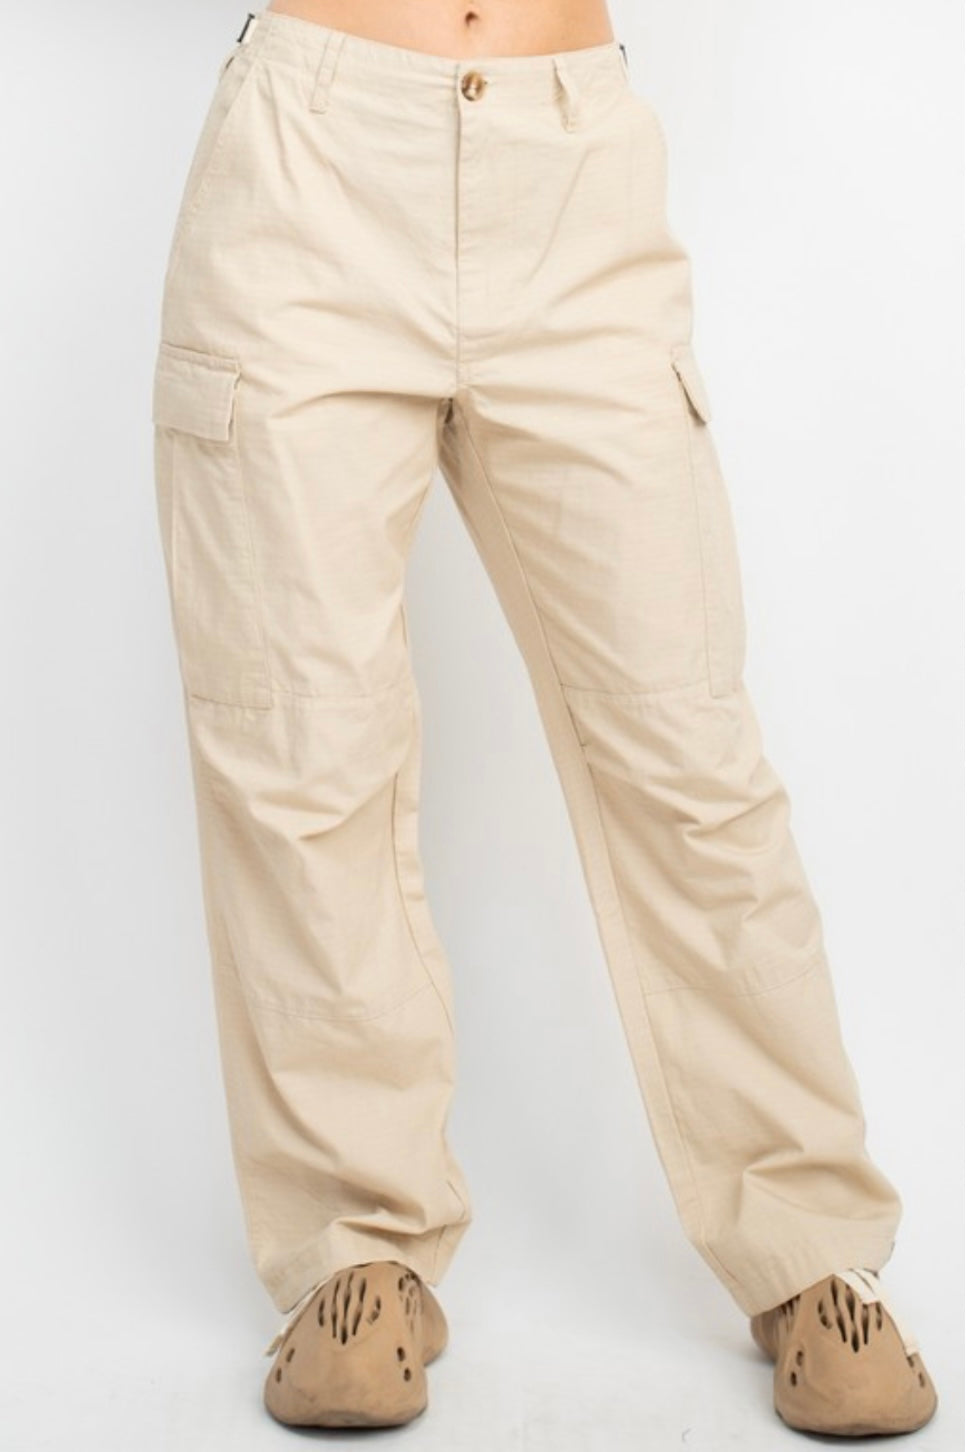 Pull & Bear cargo pants with adjustable cuff in khaki | ASOS